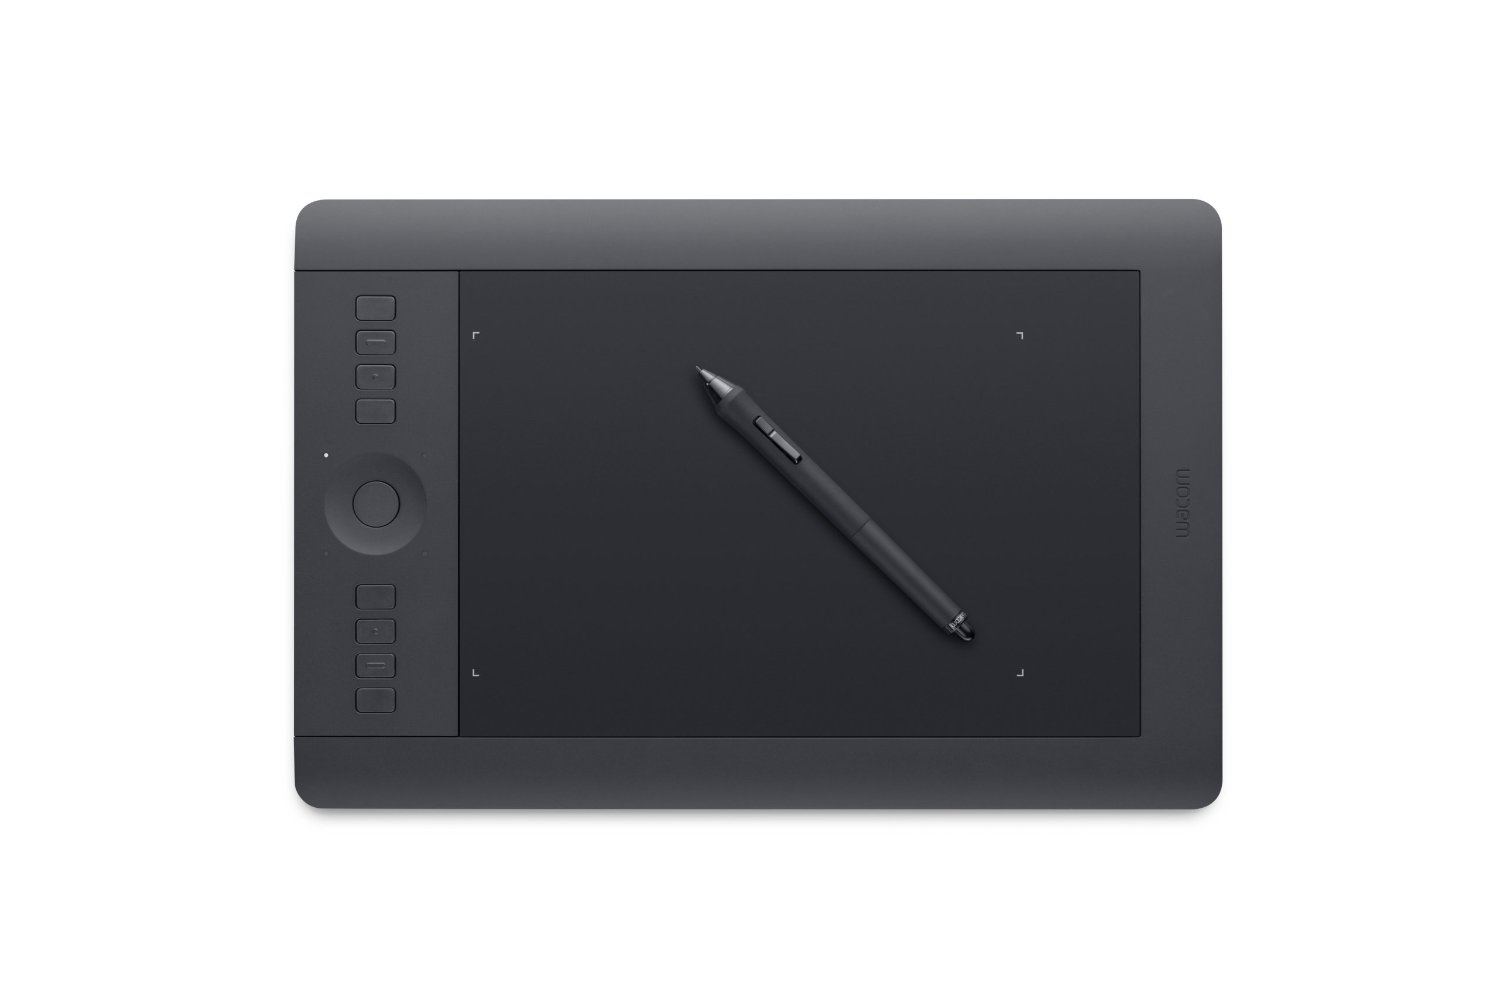 Intuos tablet for digital painting